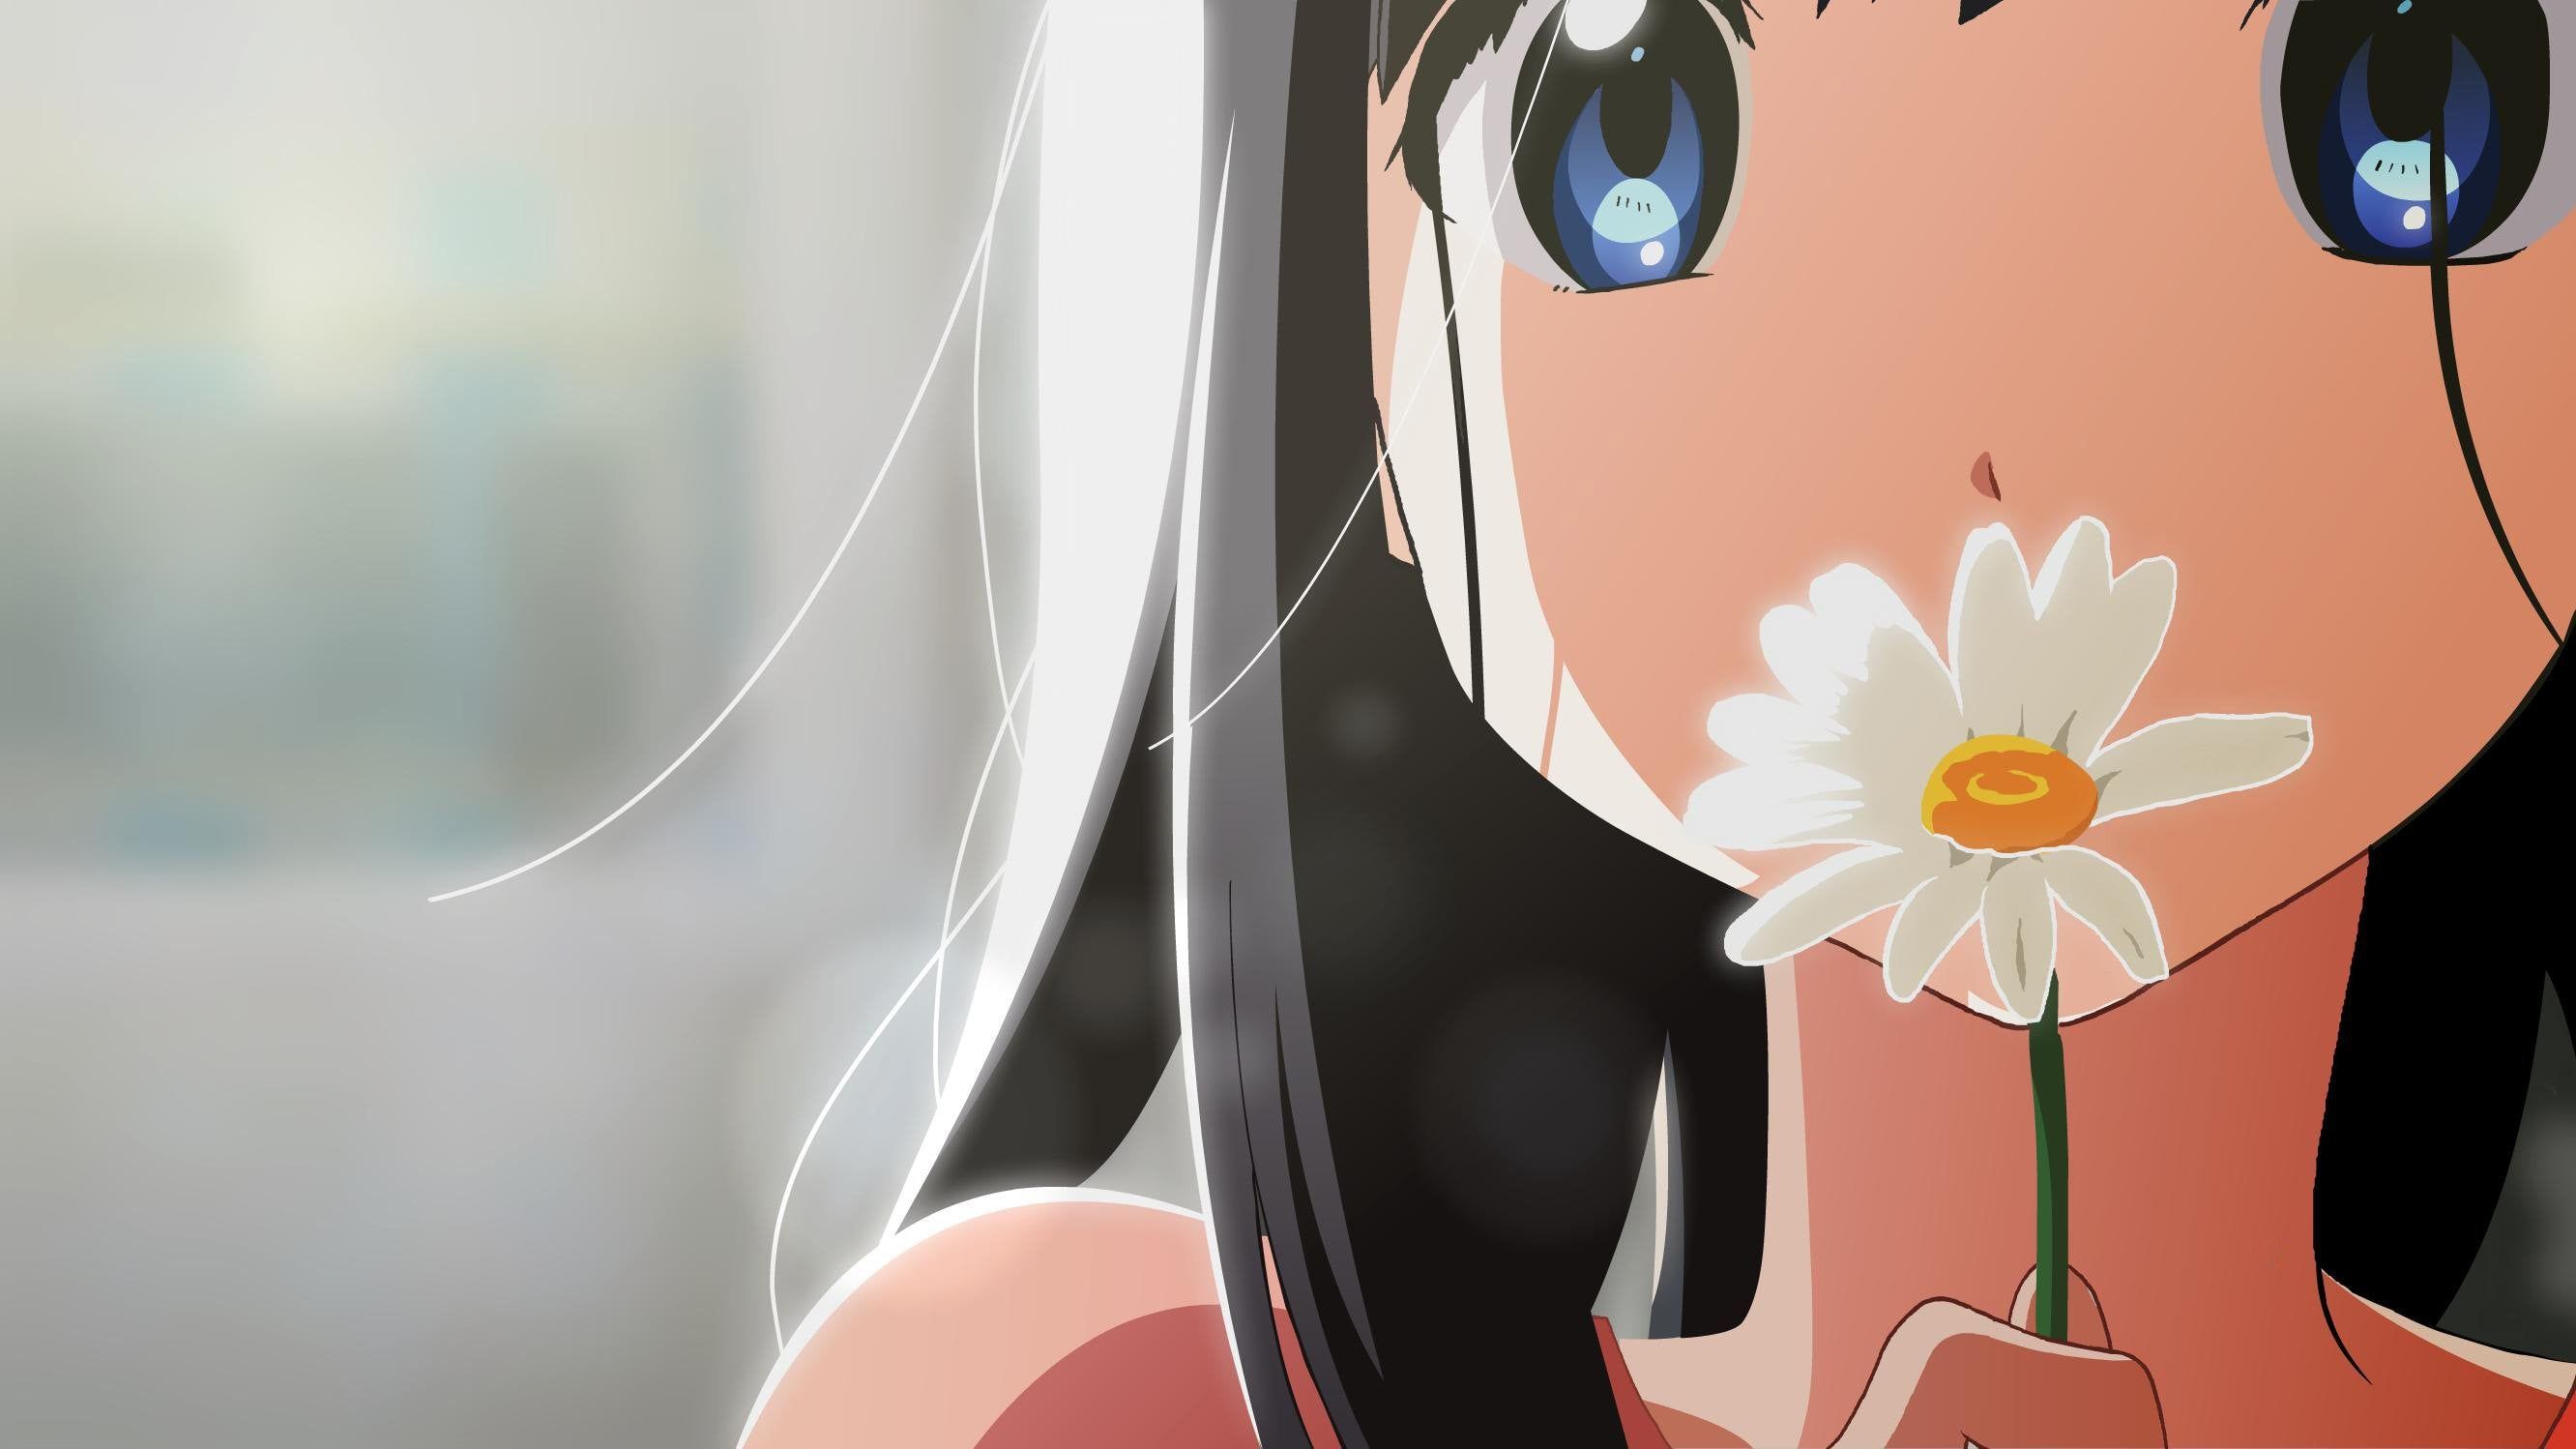 Tamako Market Wallpaper Pc Feel Free To Send Us Your Own Wallpaper And We Will Consider Adding